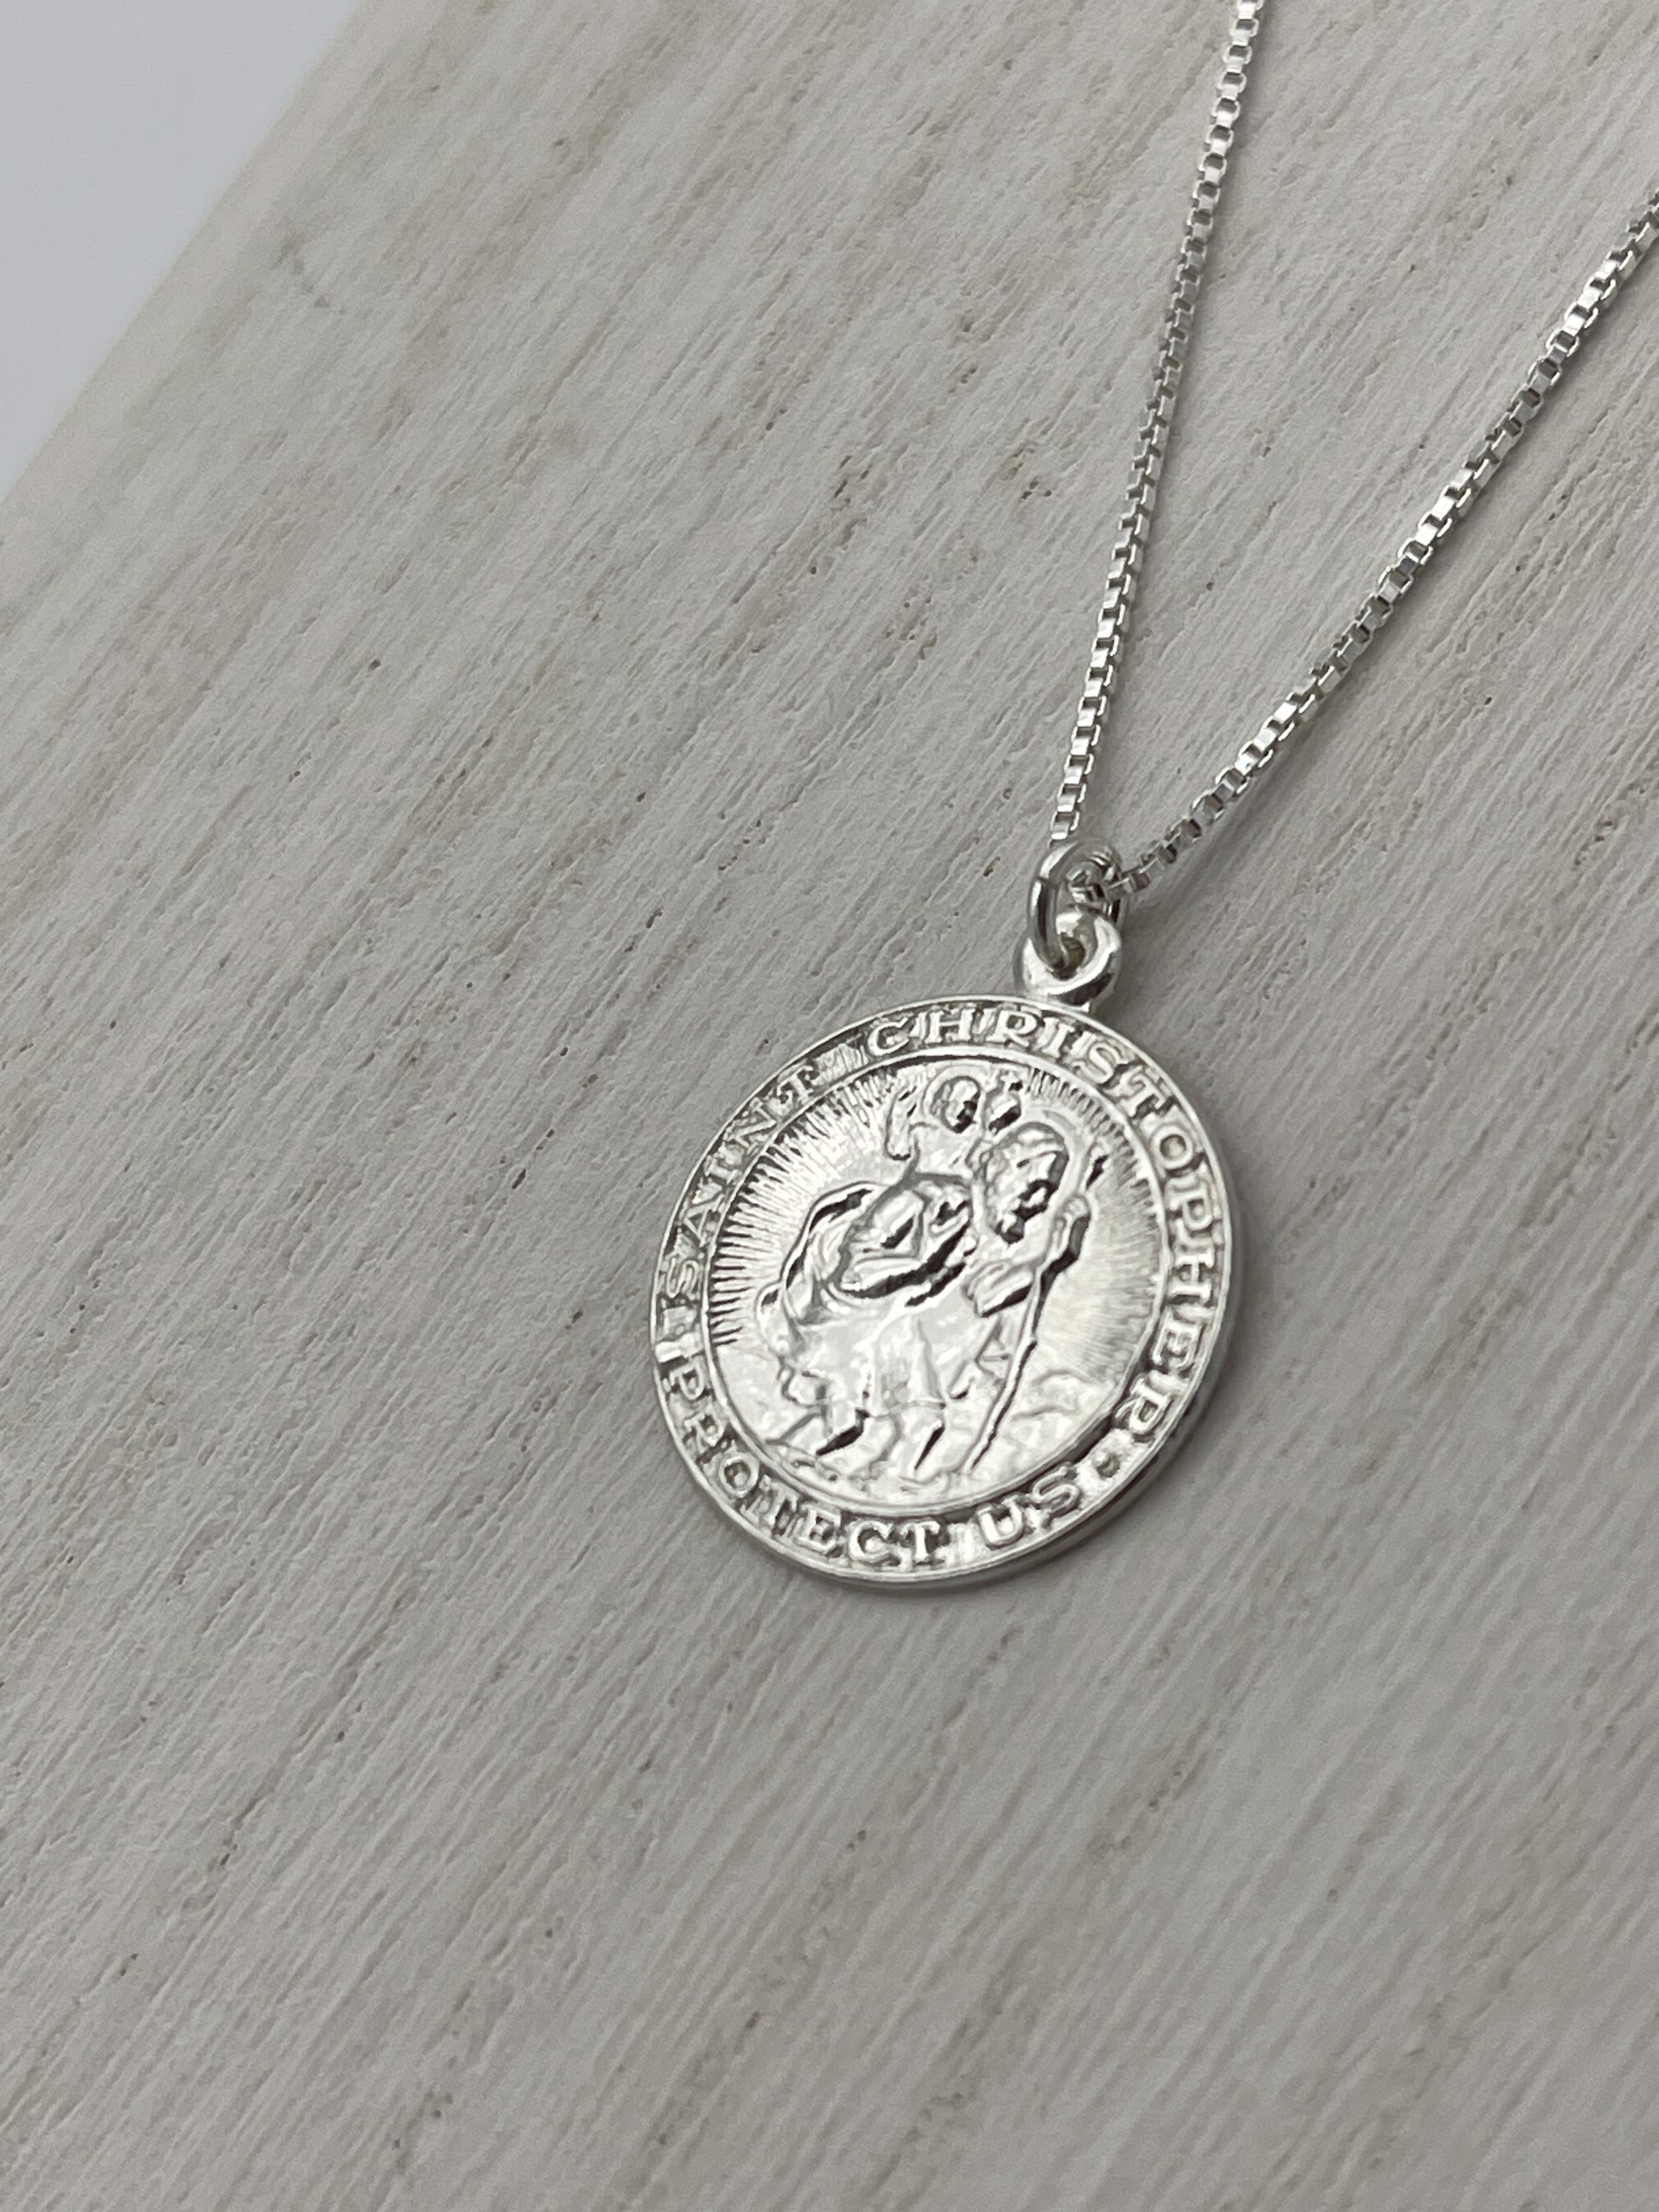 St. Christopher Traveler's Protection Silver Coin Necklace by Yulee Harris